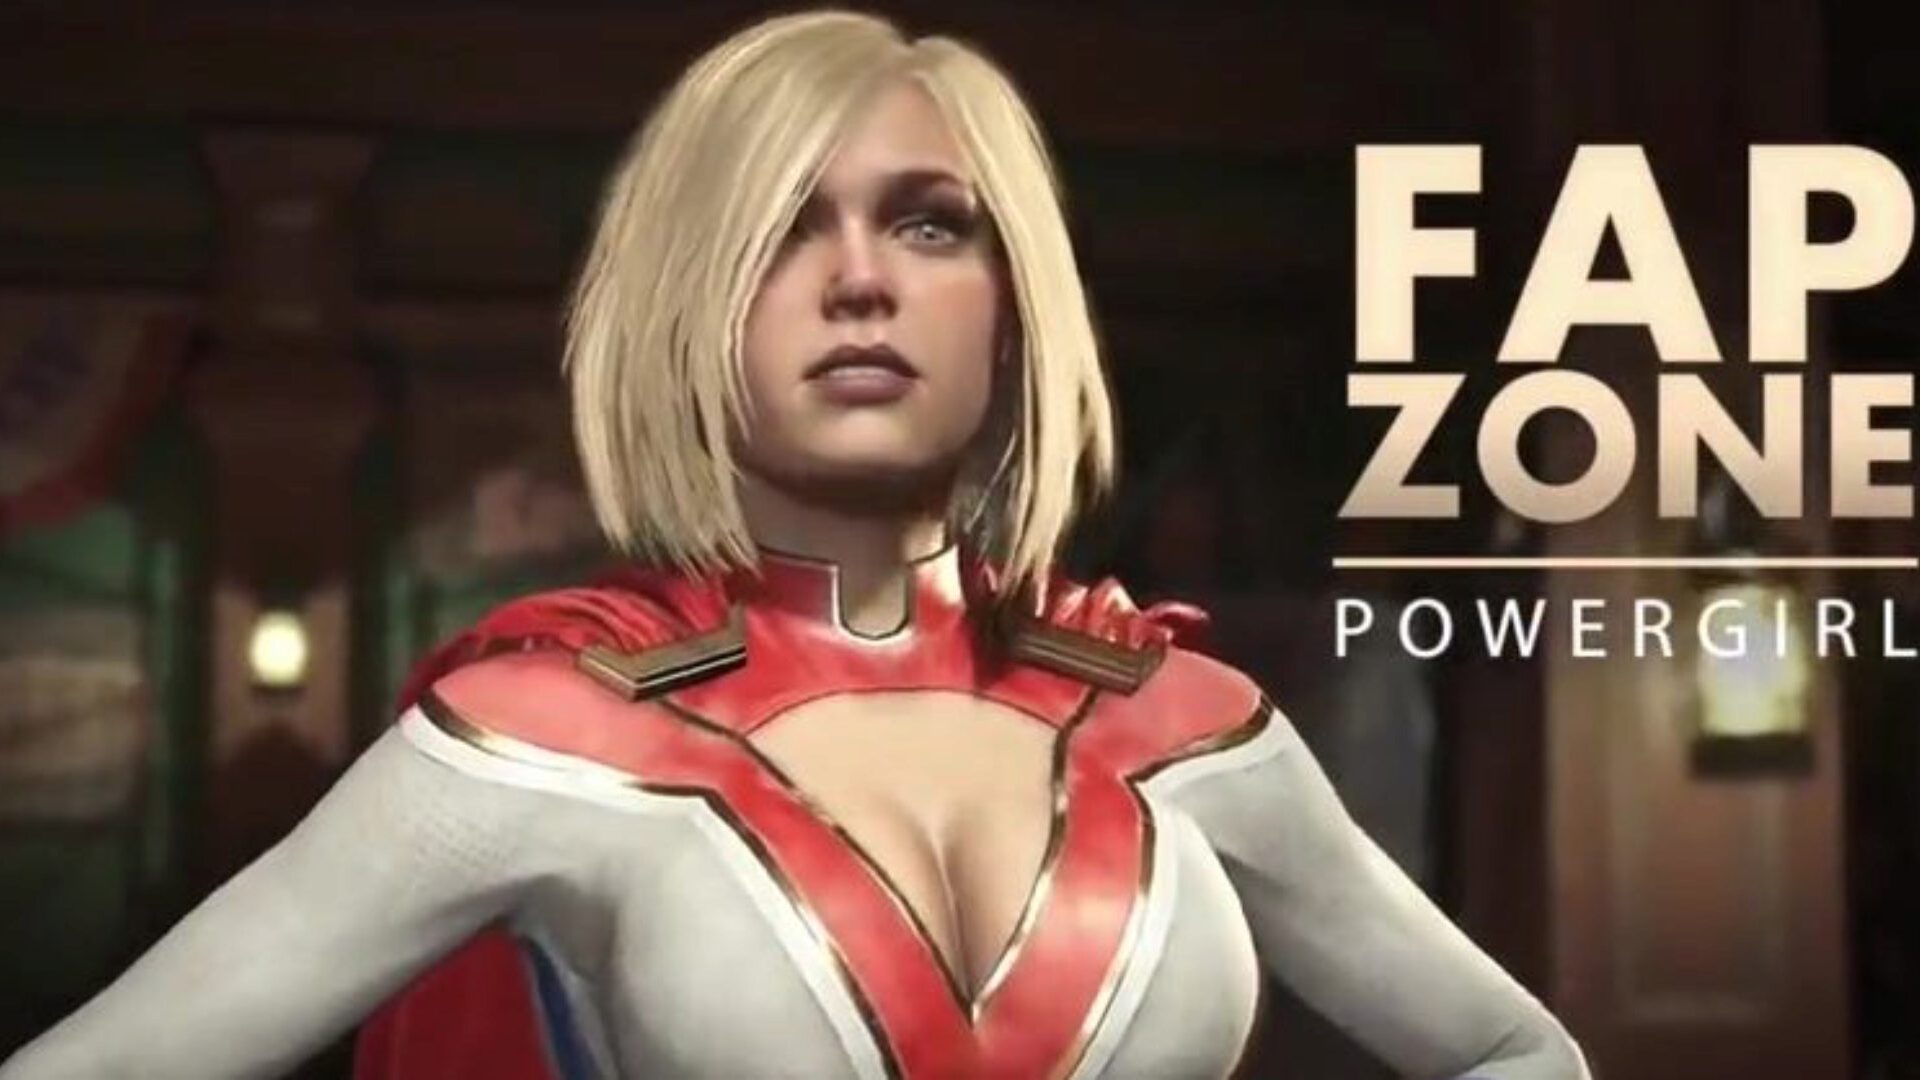 FapZone // Vigour Beauty (Injustice two